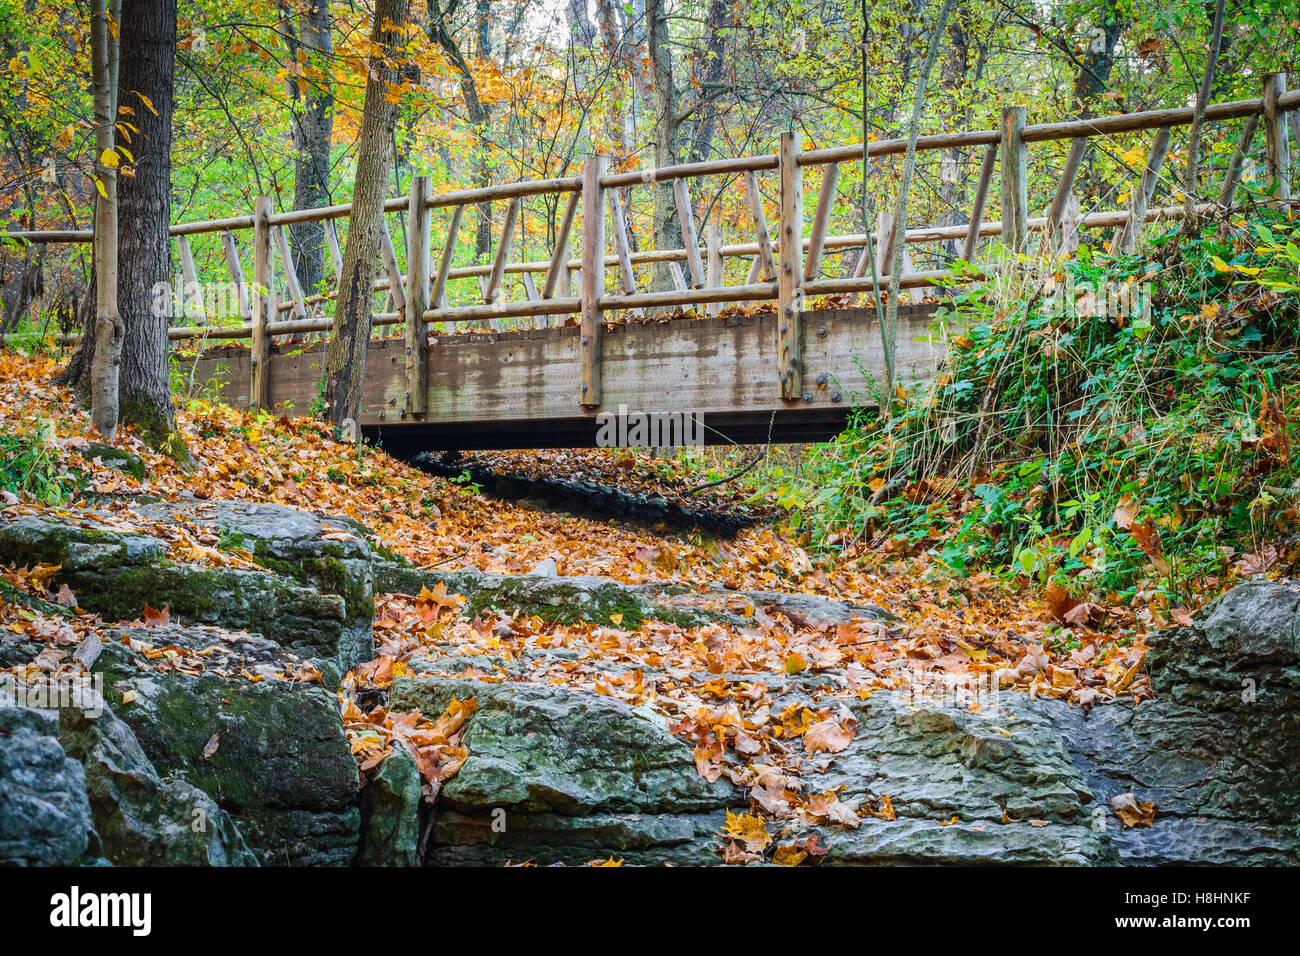 Trail bridge crossing a dry stream with stone creek bed. Stock Photo